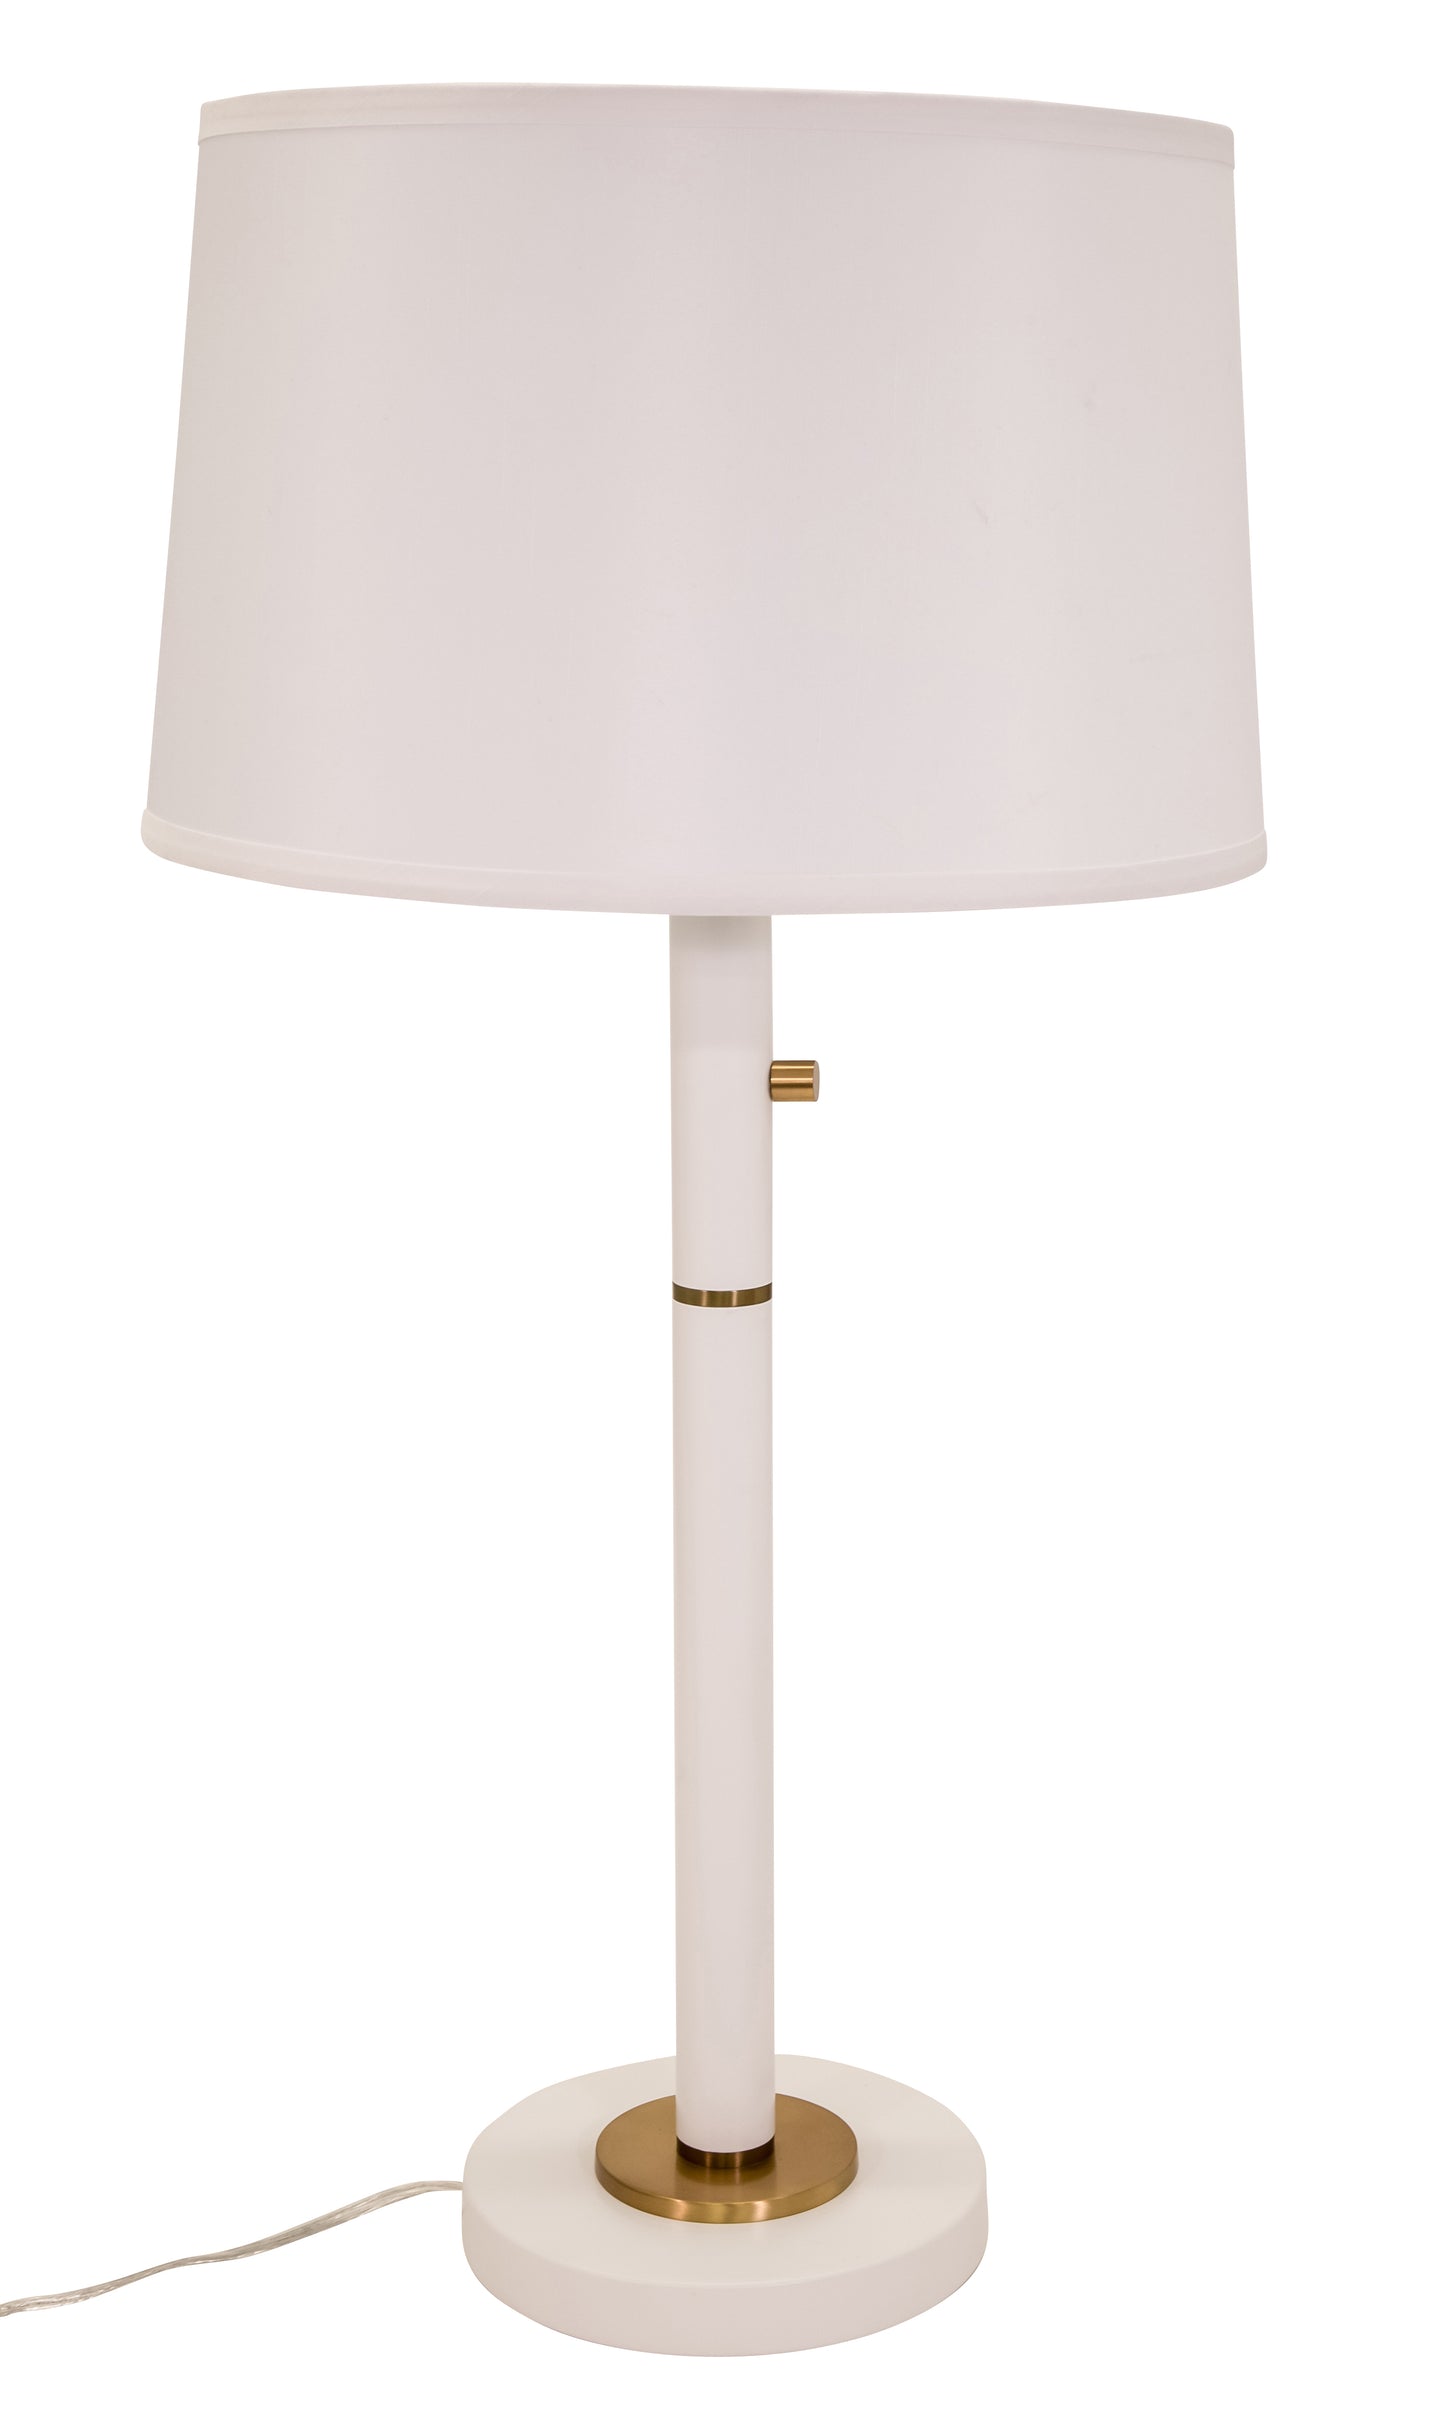 House of Troy Rupert 3-Way Table Lamp White Weathered Brass Accents USB Port RU750-WT